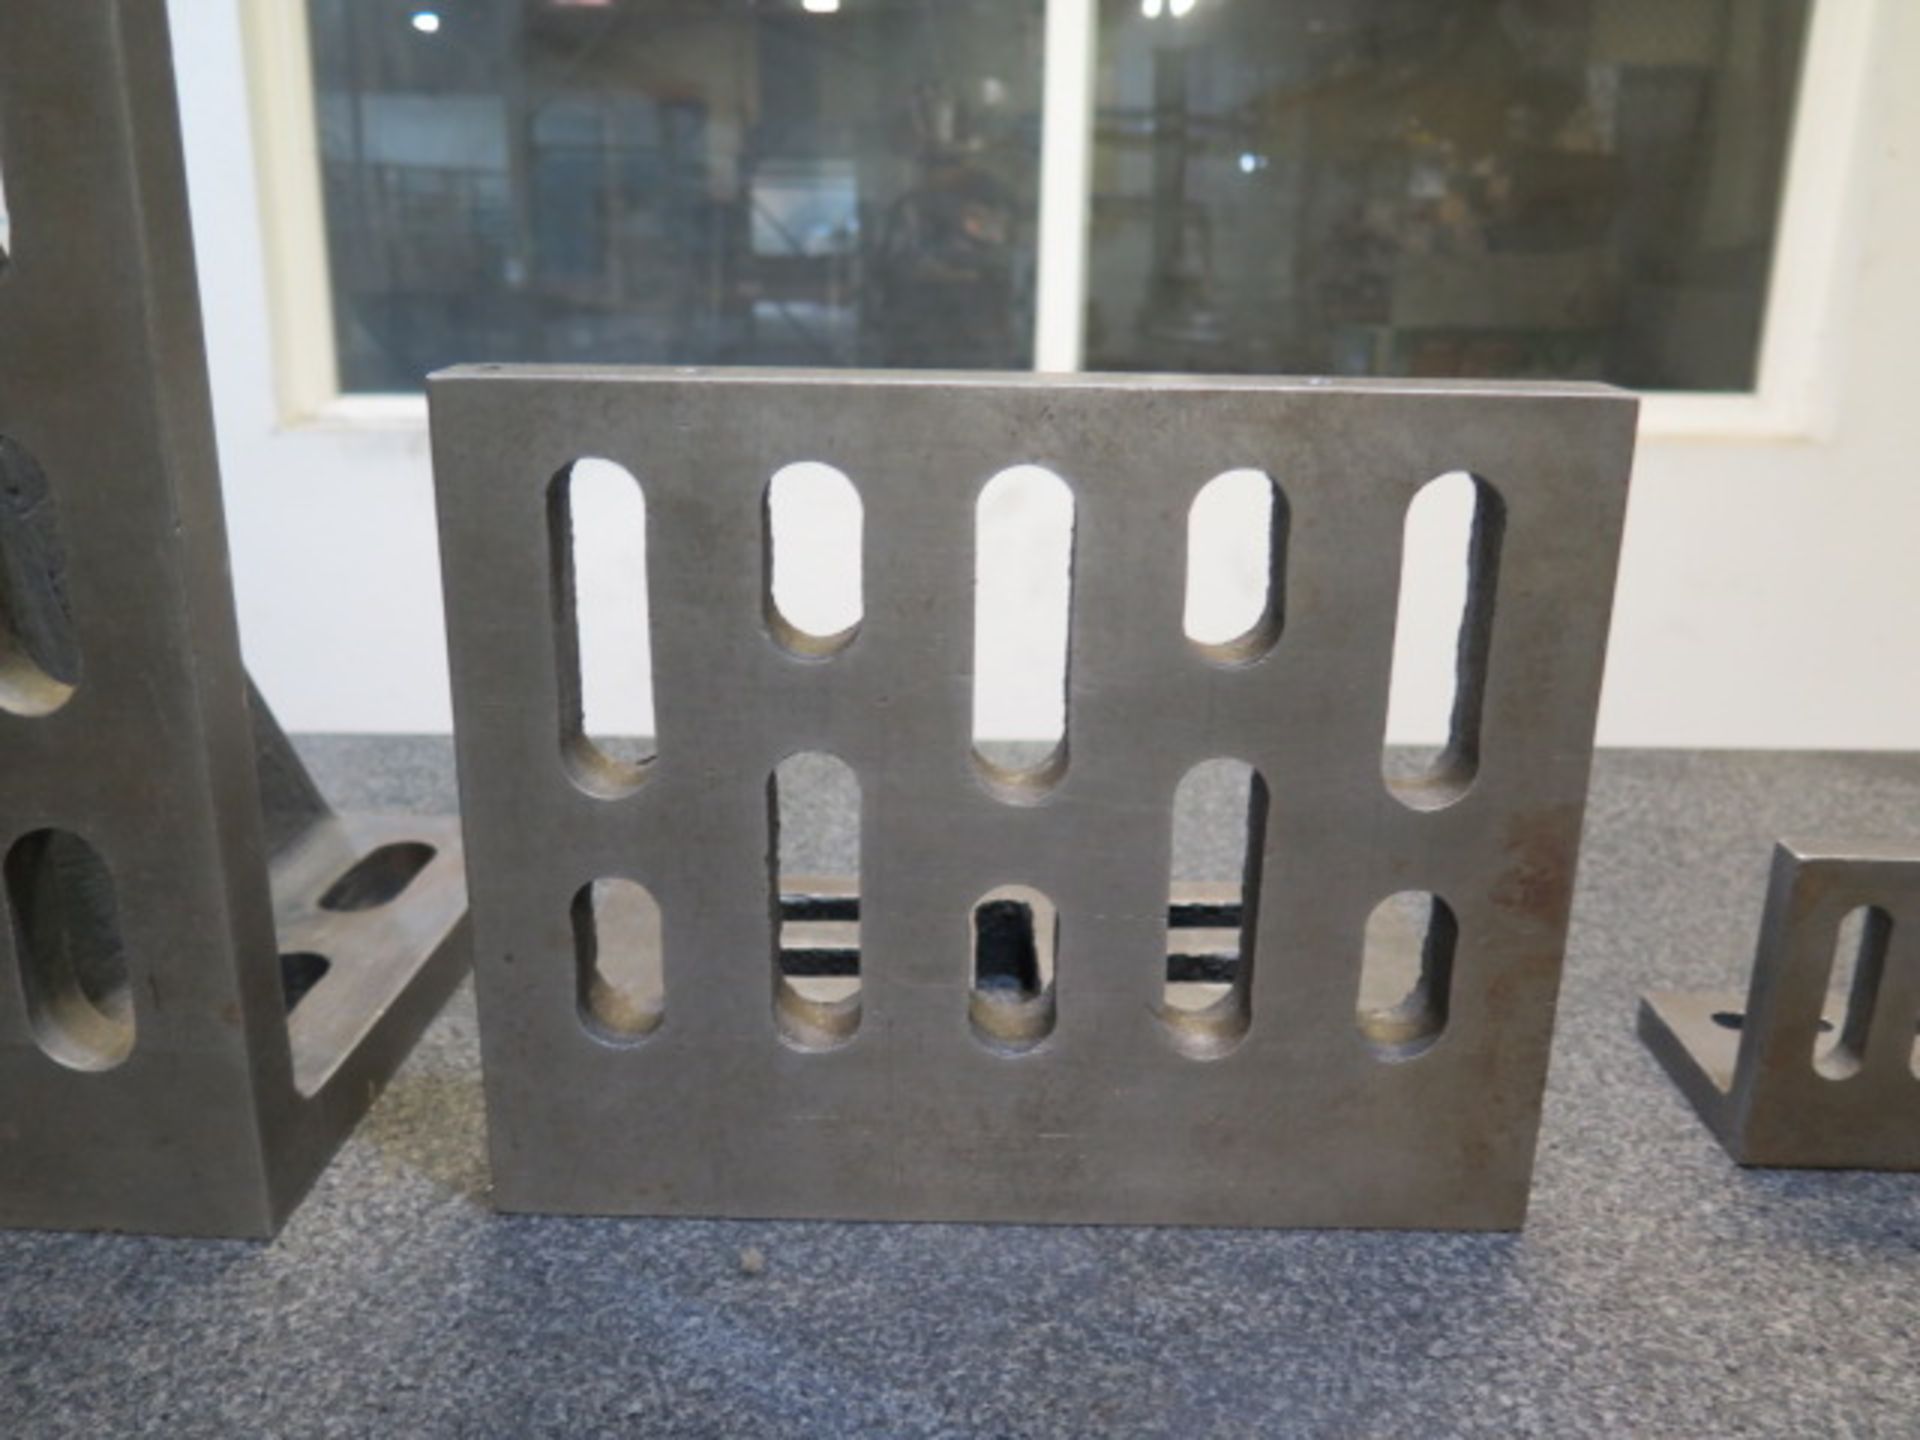 12" x 16" x 9", 8" x 10" x 6" and 3 1/2" x 4 1/2" x 3" Angle Plates (3) (SOLD AS-IS - NO WARRANTY) - Image 3 of 4